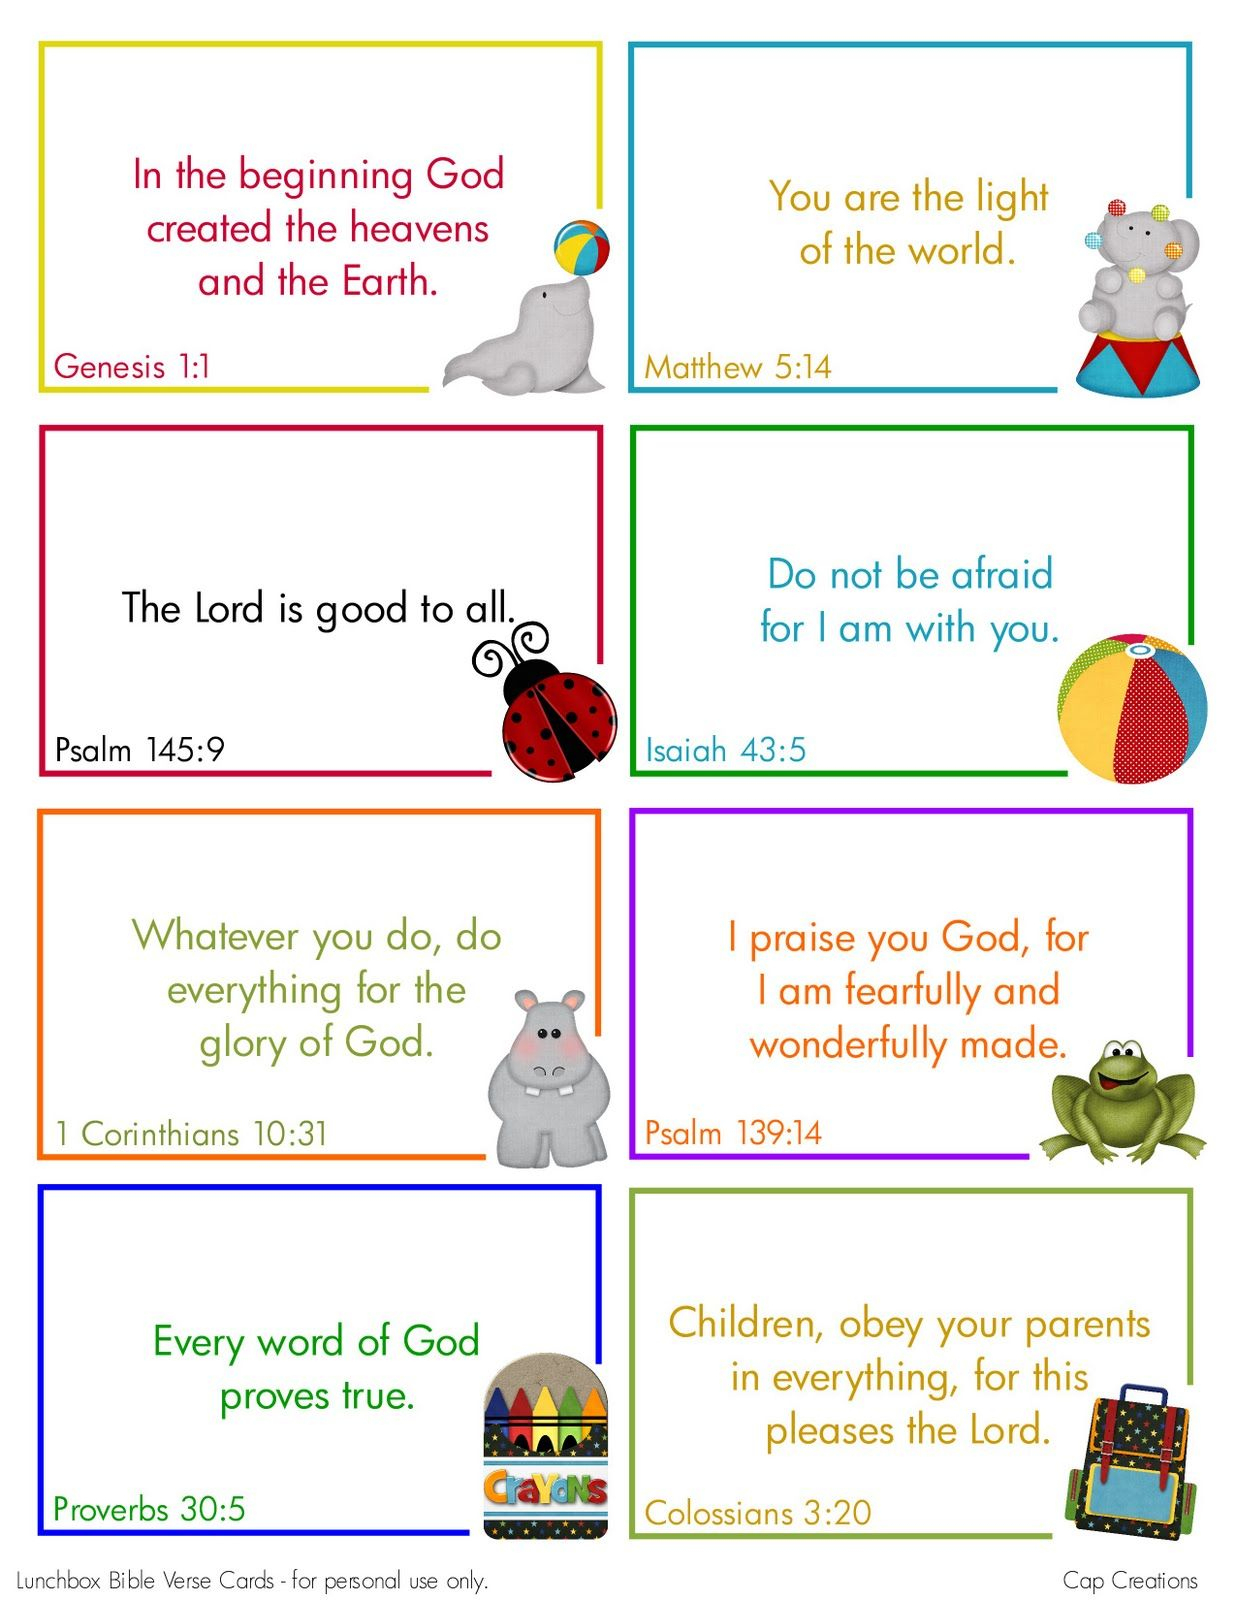 Free Printable Lunchbox Bible Verse Cards Cute.could Use These - Free Printable Bible Verses For Children